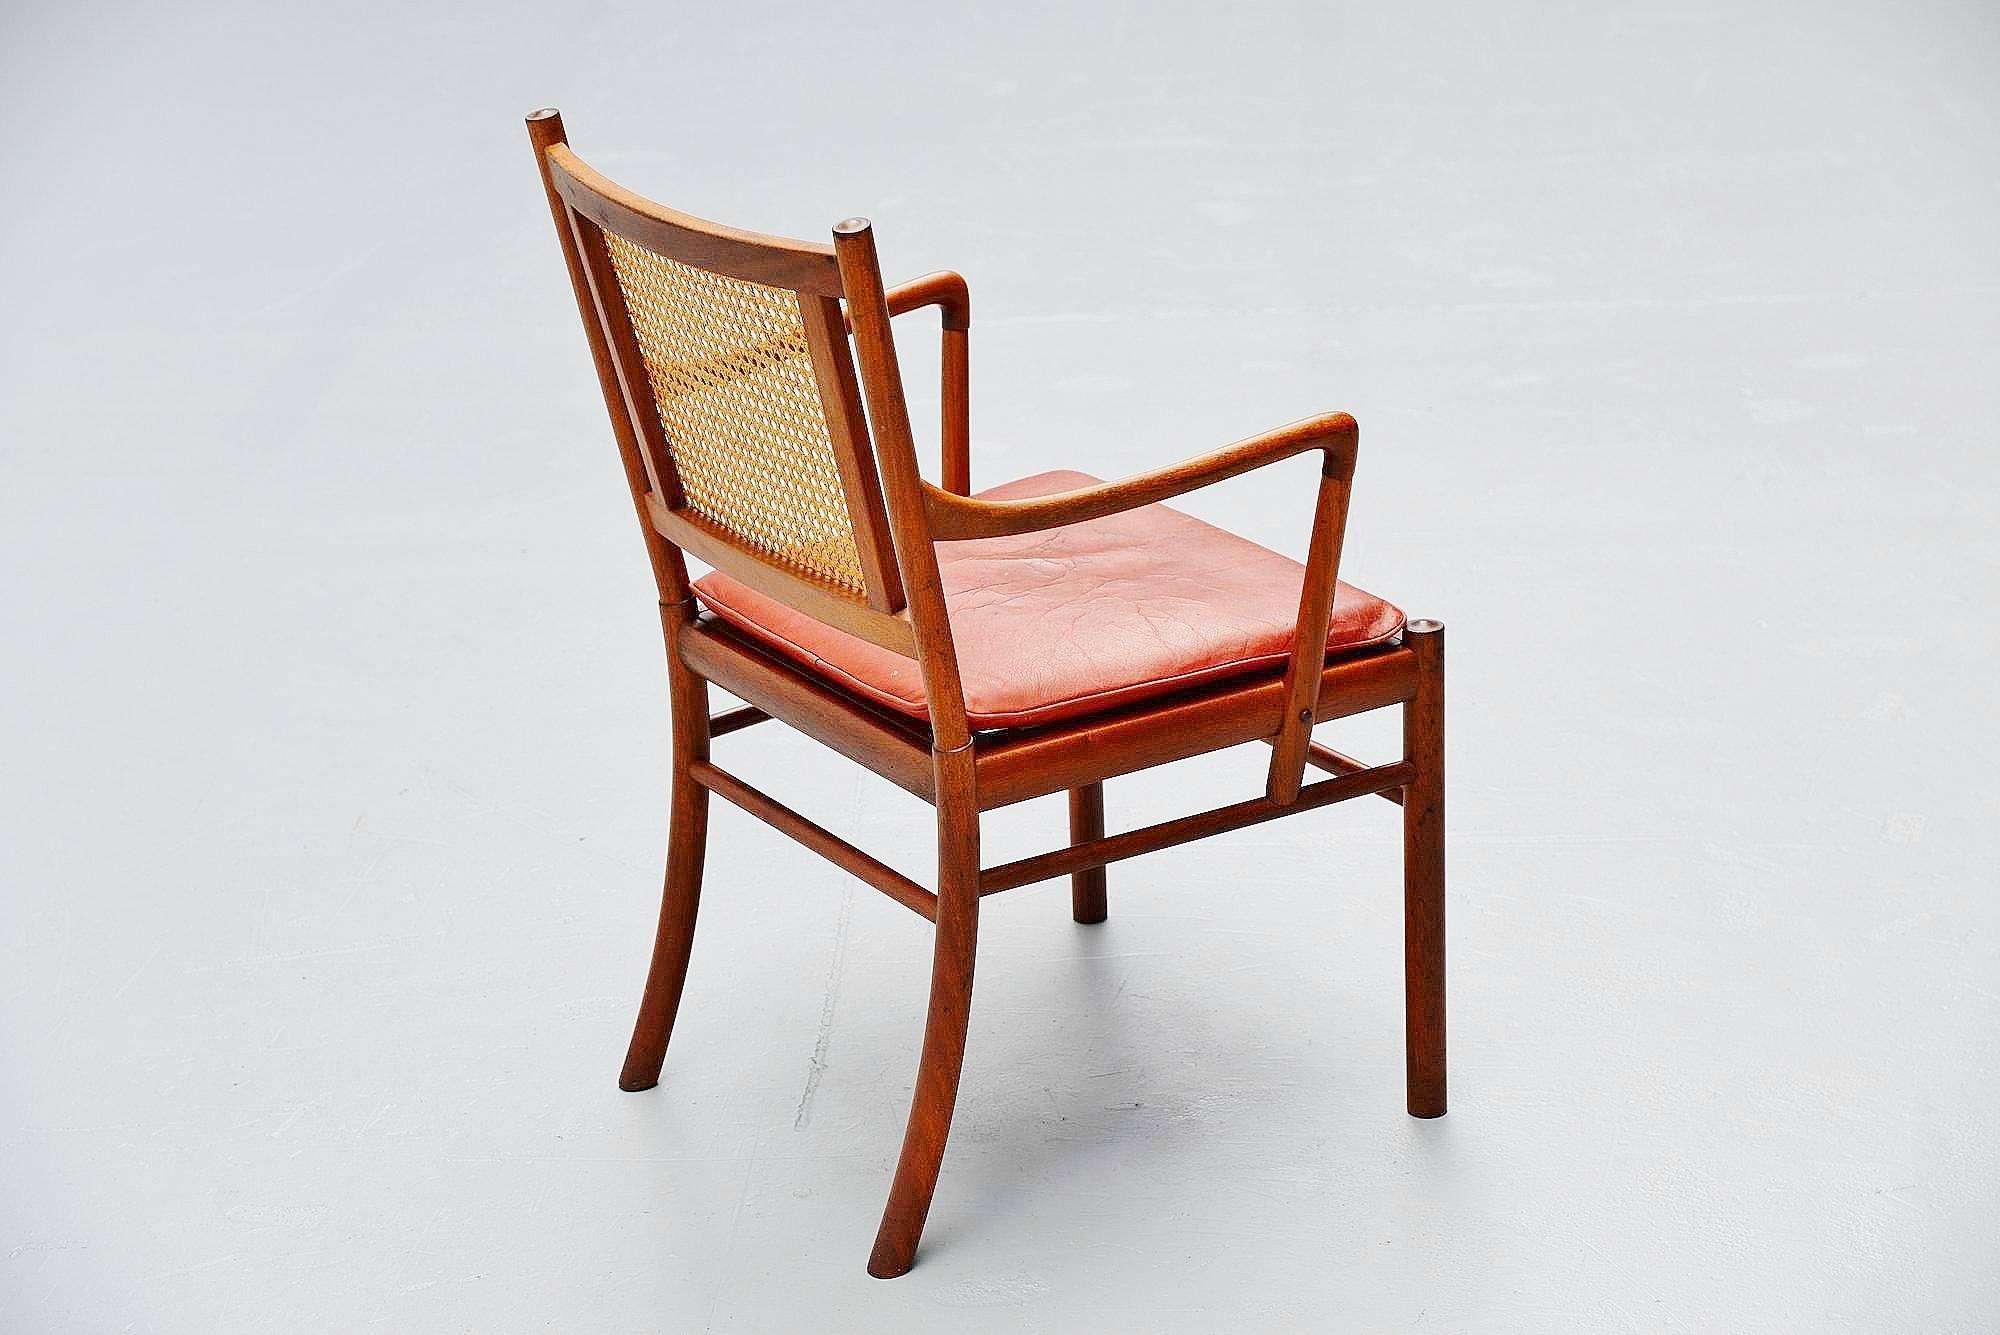 Cane Ole Wanscher Colonial Chair by Poul Jeppesens, Denmark, 1960